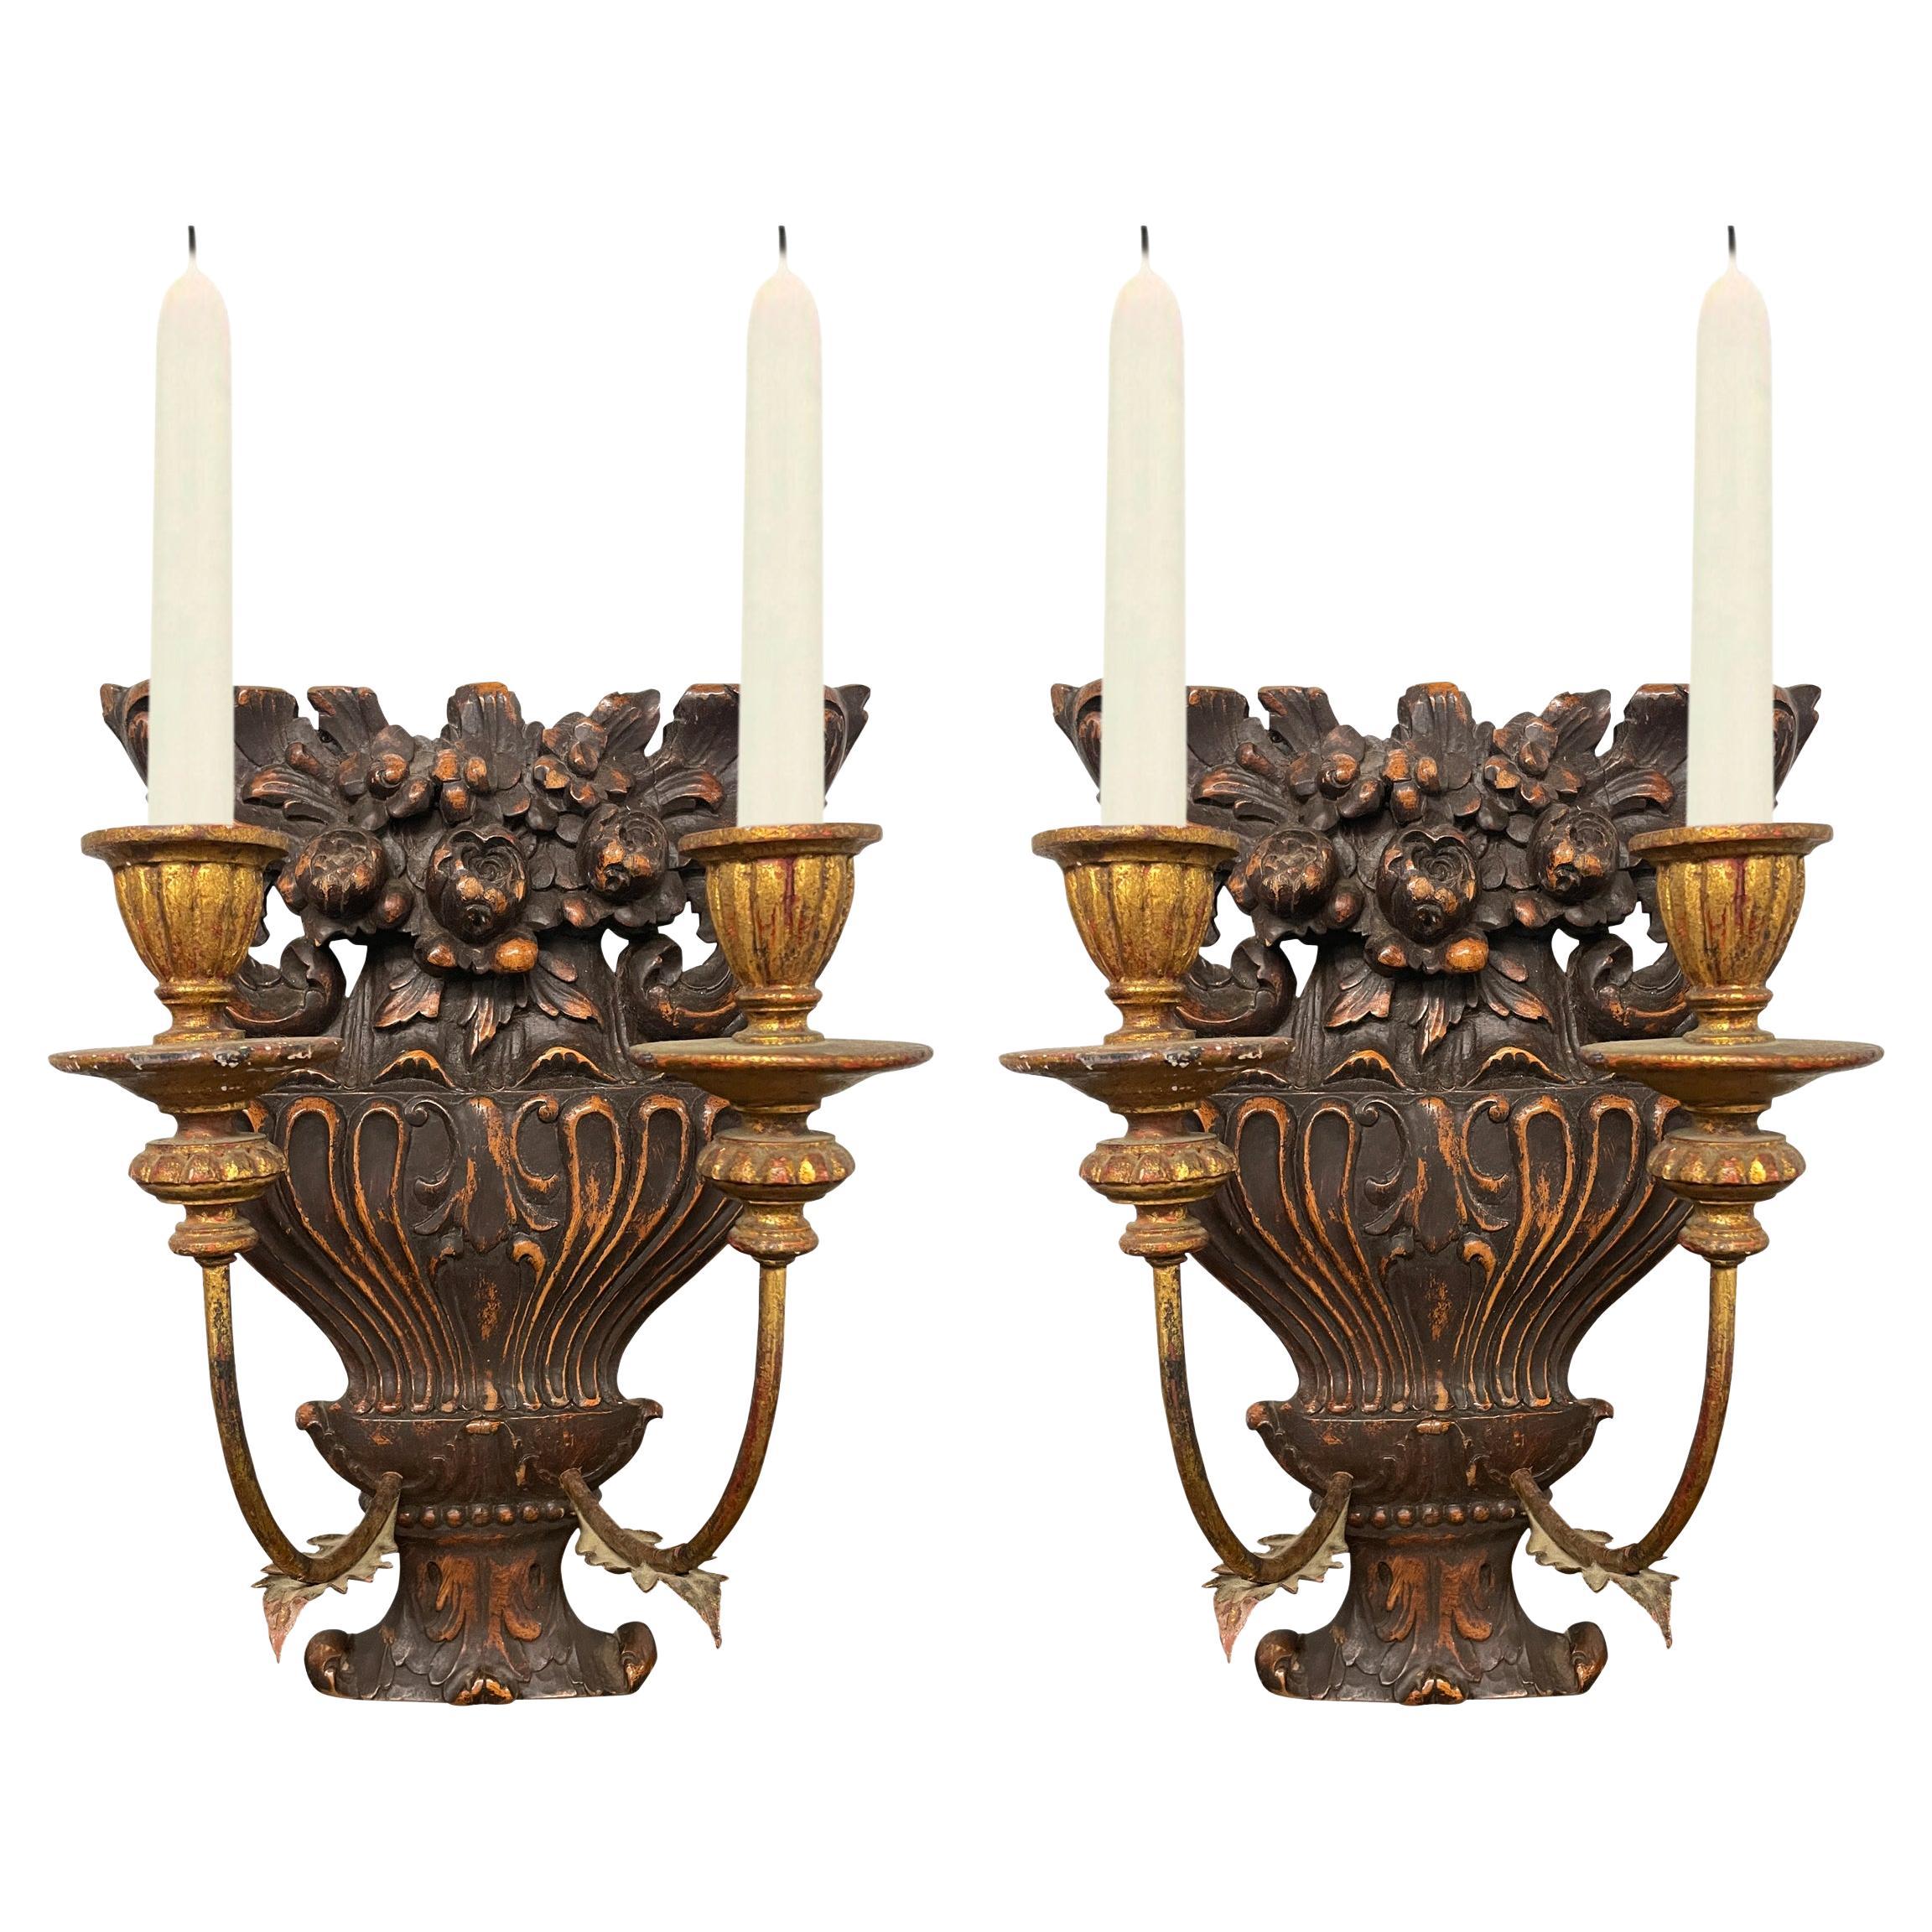 Pair of 19th Century French Carved and Gilt Wood Candle Sconces For Sale